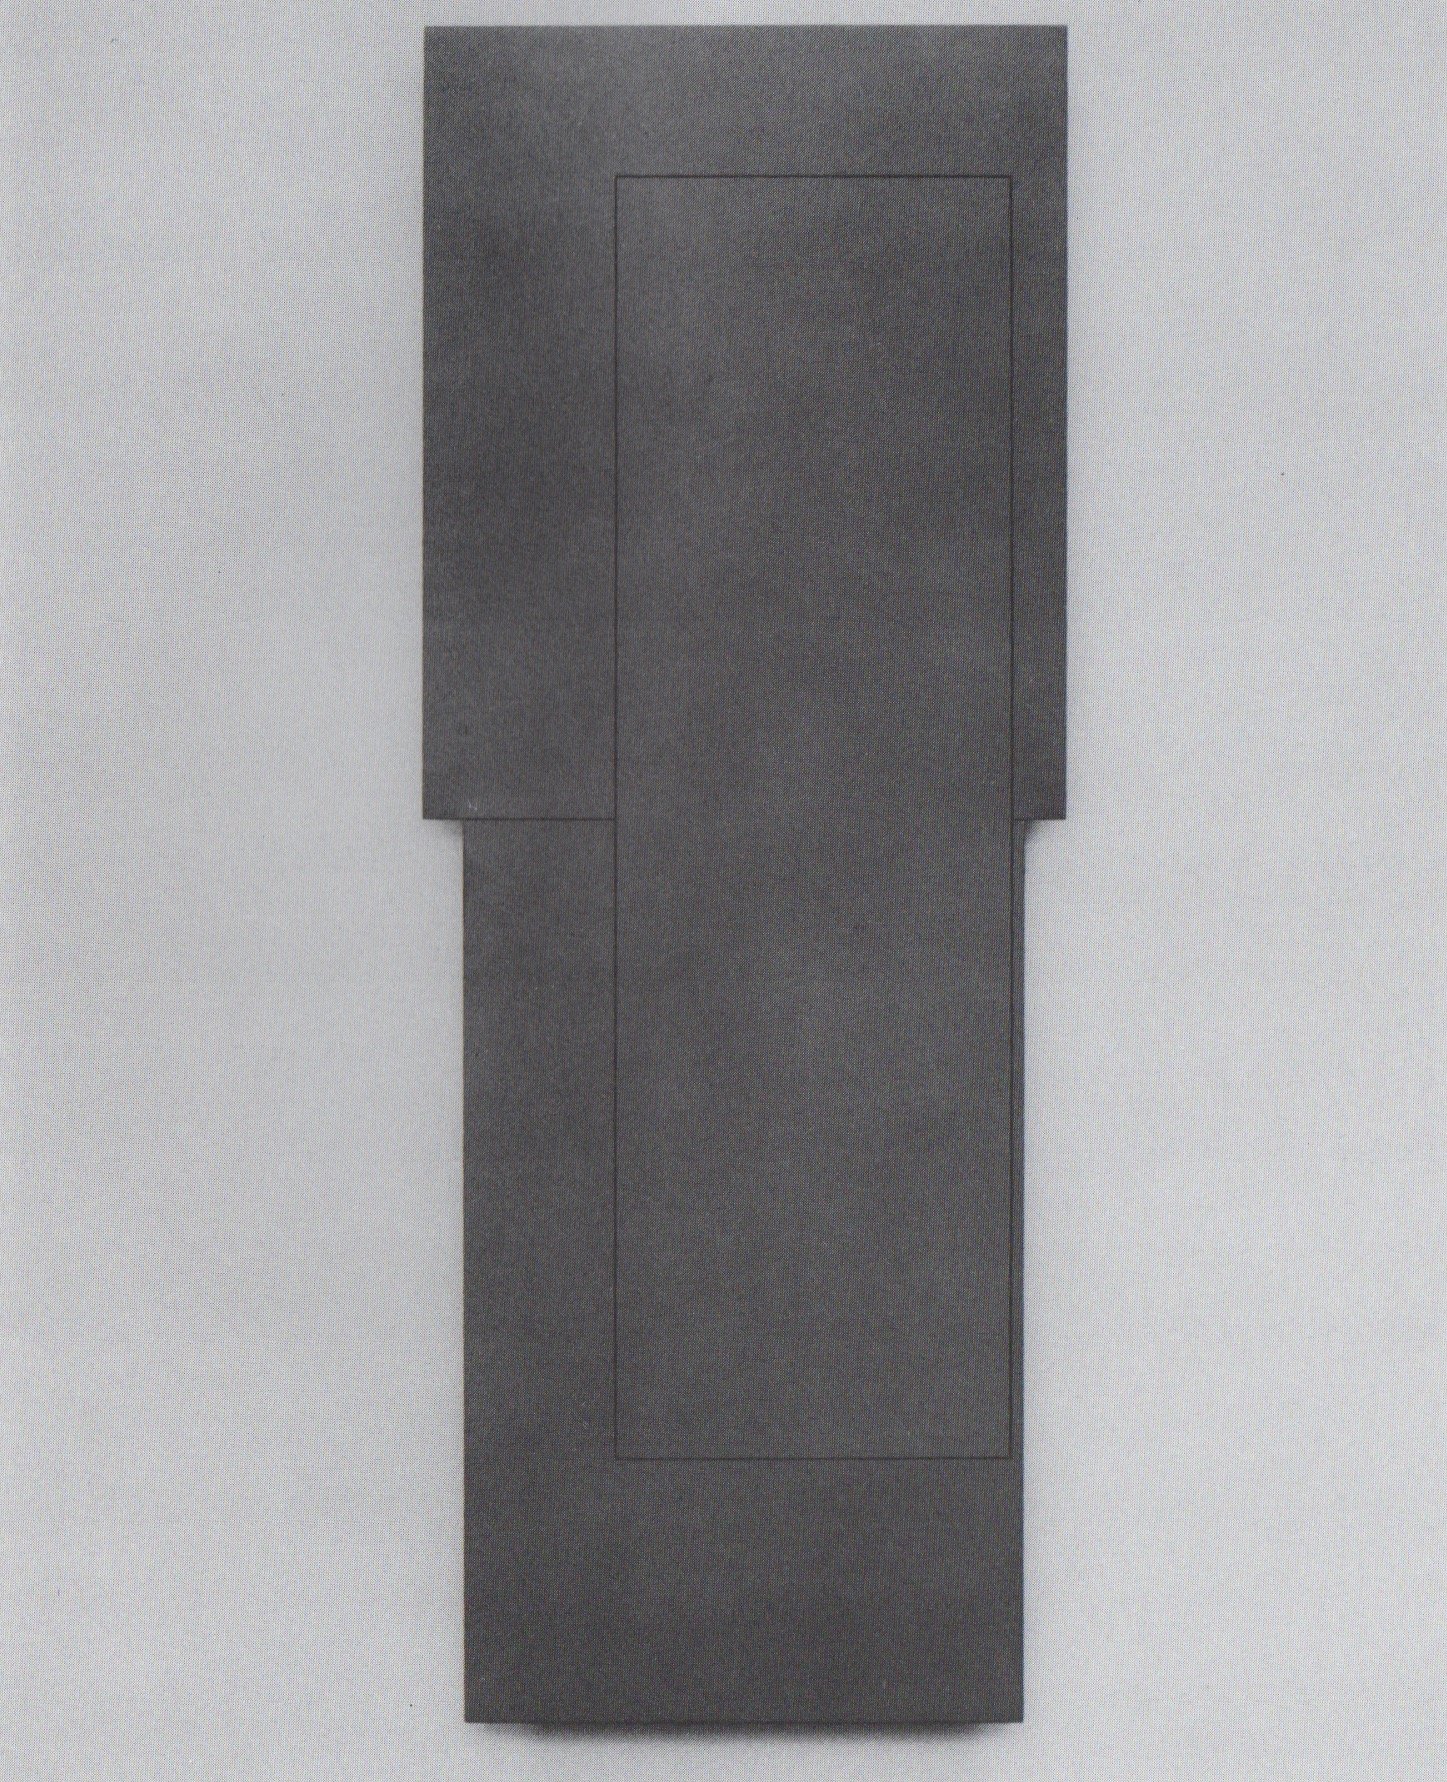 fig. 2: &quot;assembly of rectangles I&quot; (1981), oil on plywood, 159 x 60 cm